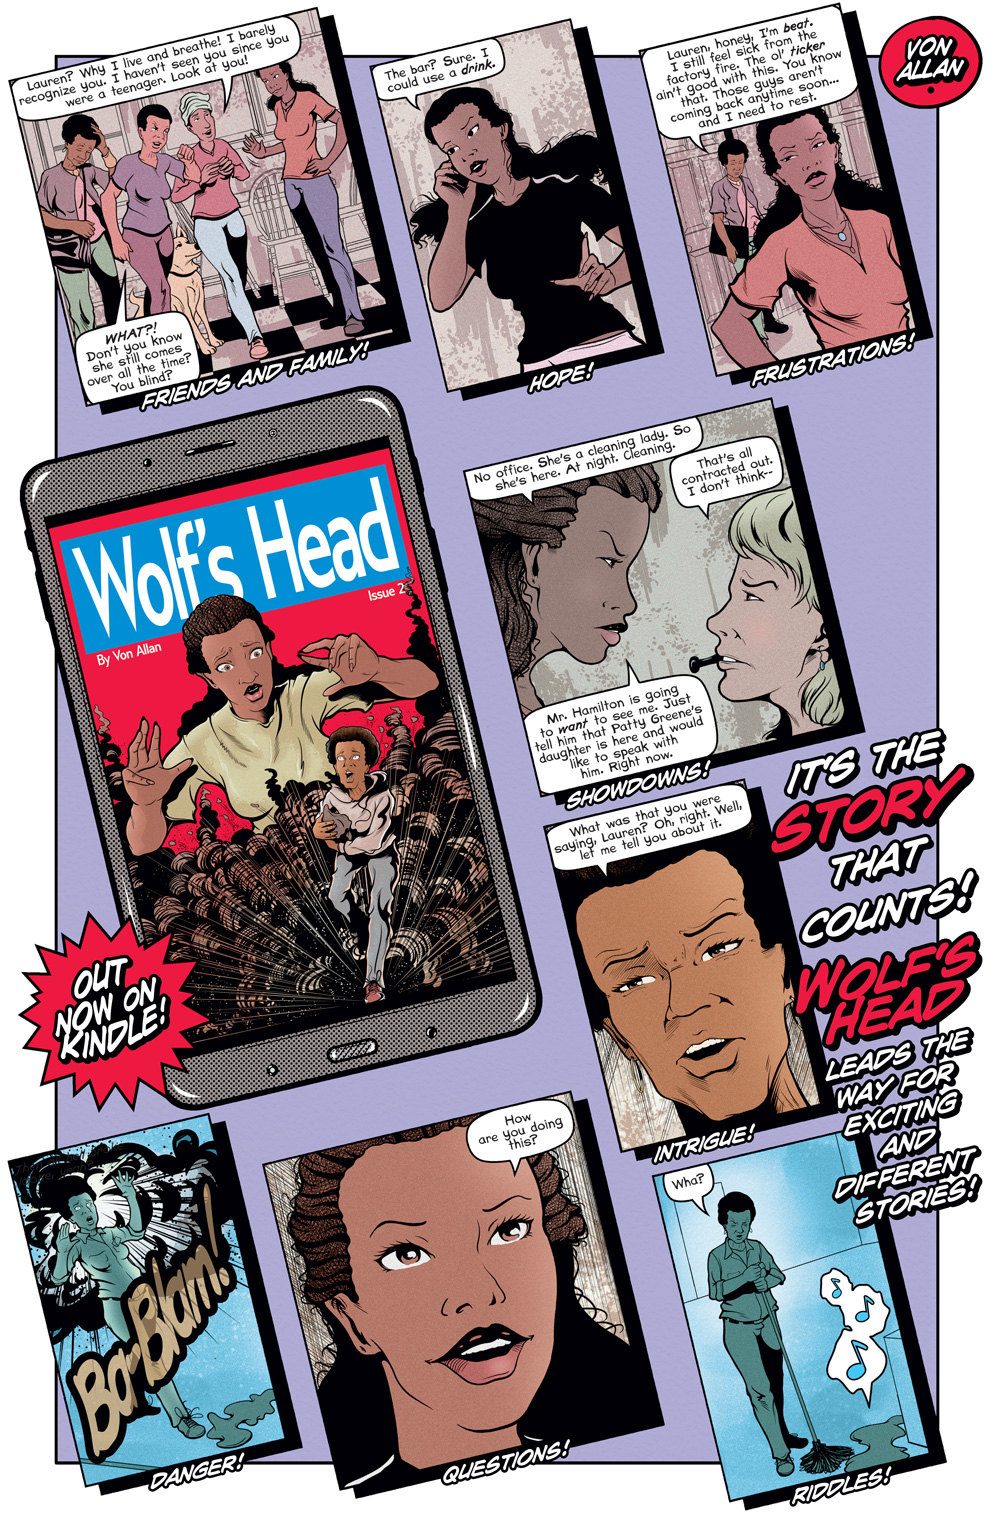 Teaser image for the digital edition of WOLF'S HEAD issue 2 written and illustrated by Von Allan